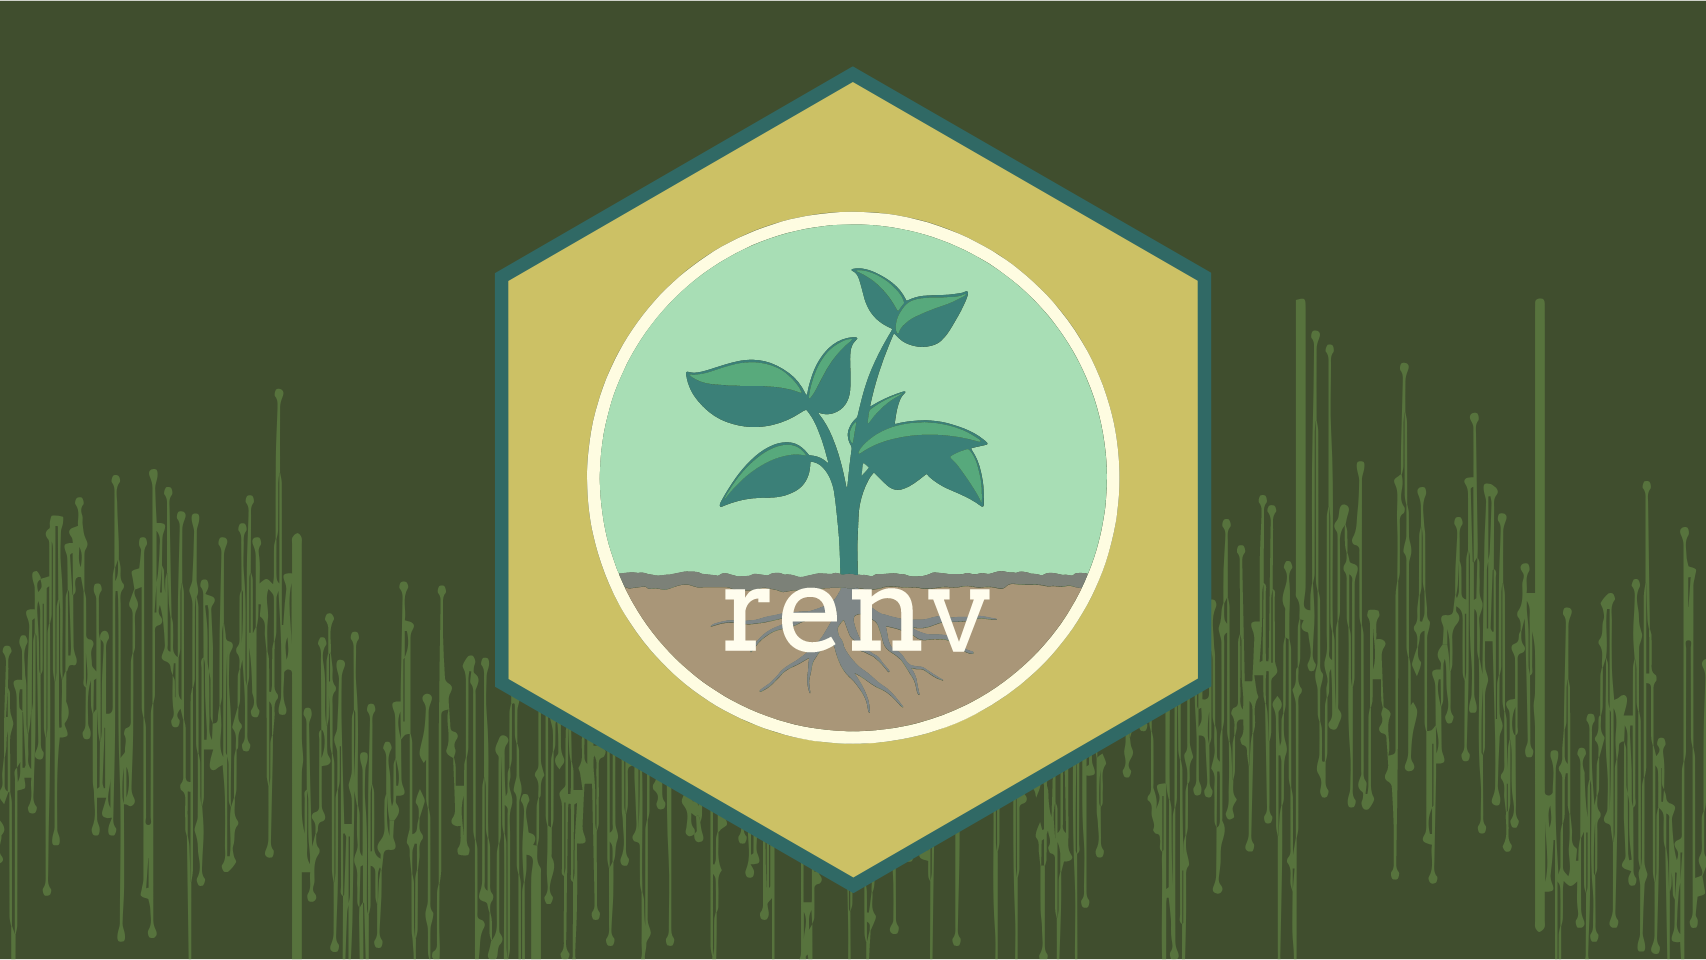 The renv hex sticker, consisting of the text "Renv" and a small plant coming out of the ground.